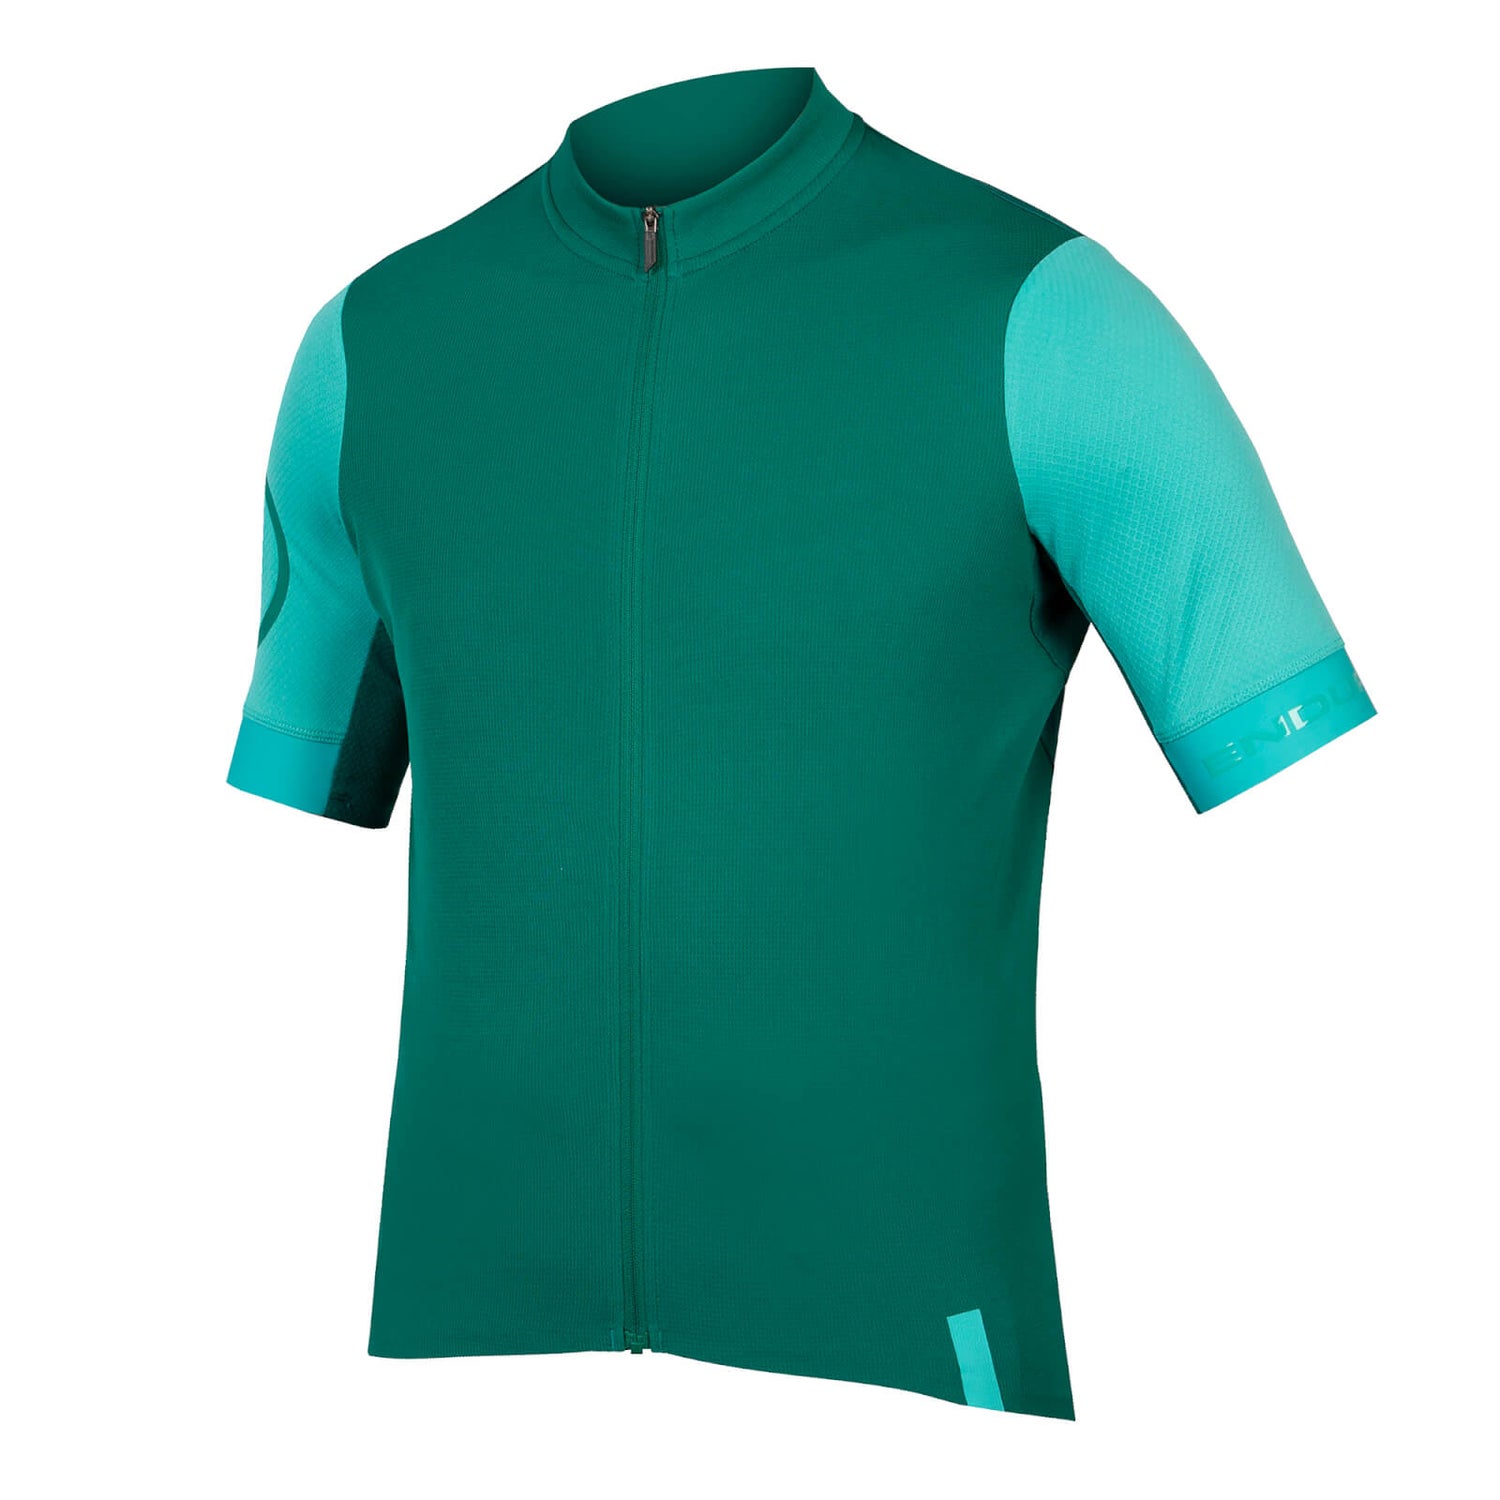 Men's FS260 S/S Jersey - Emerald Green - XXL (Relaxed Fit)